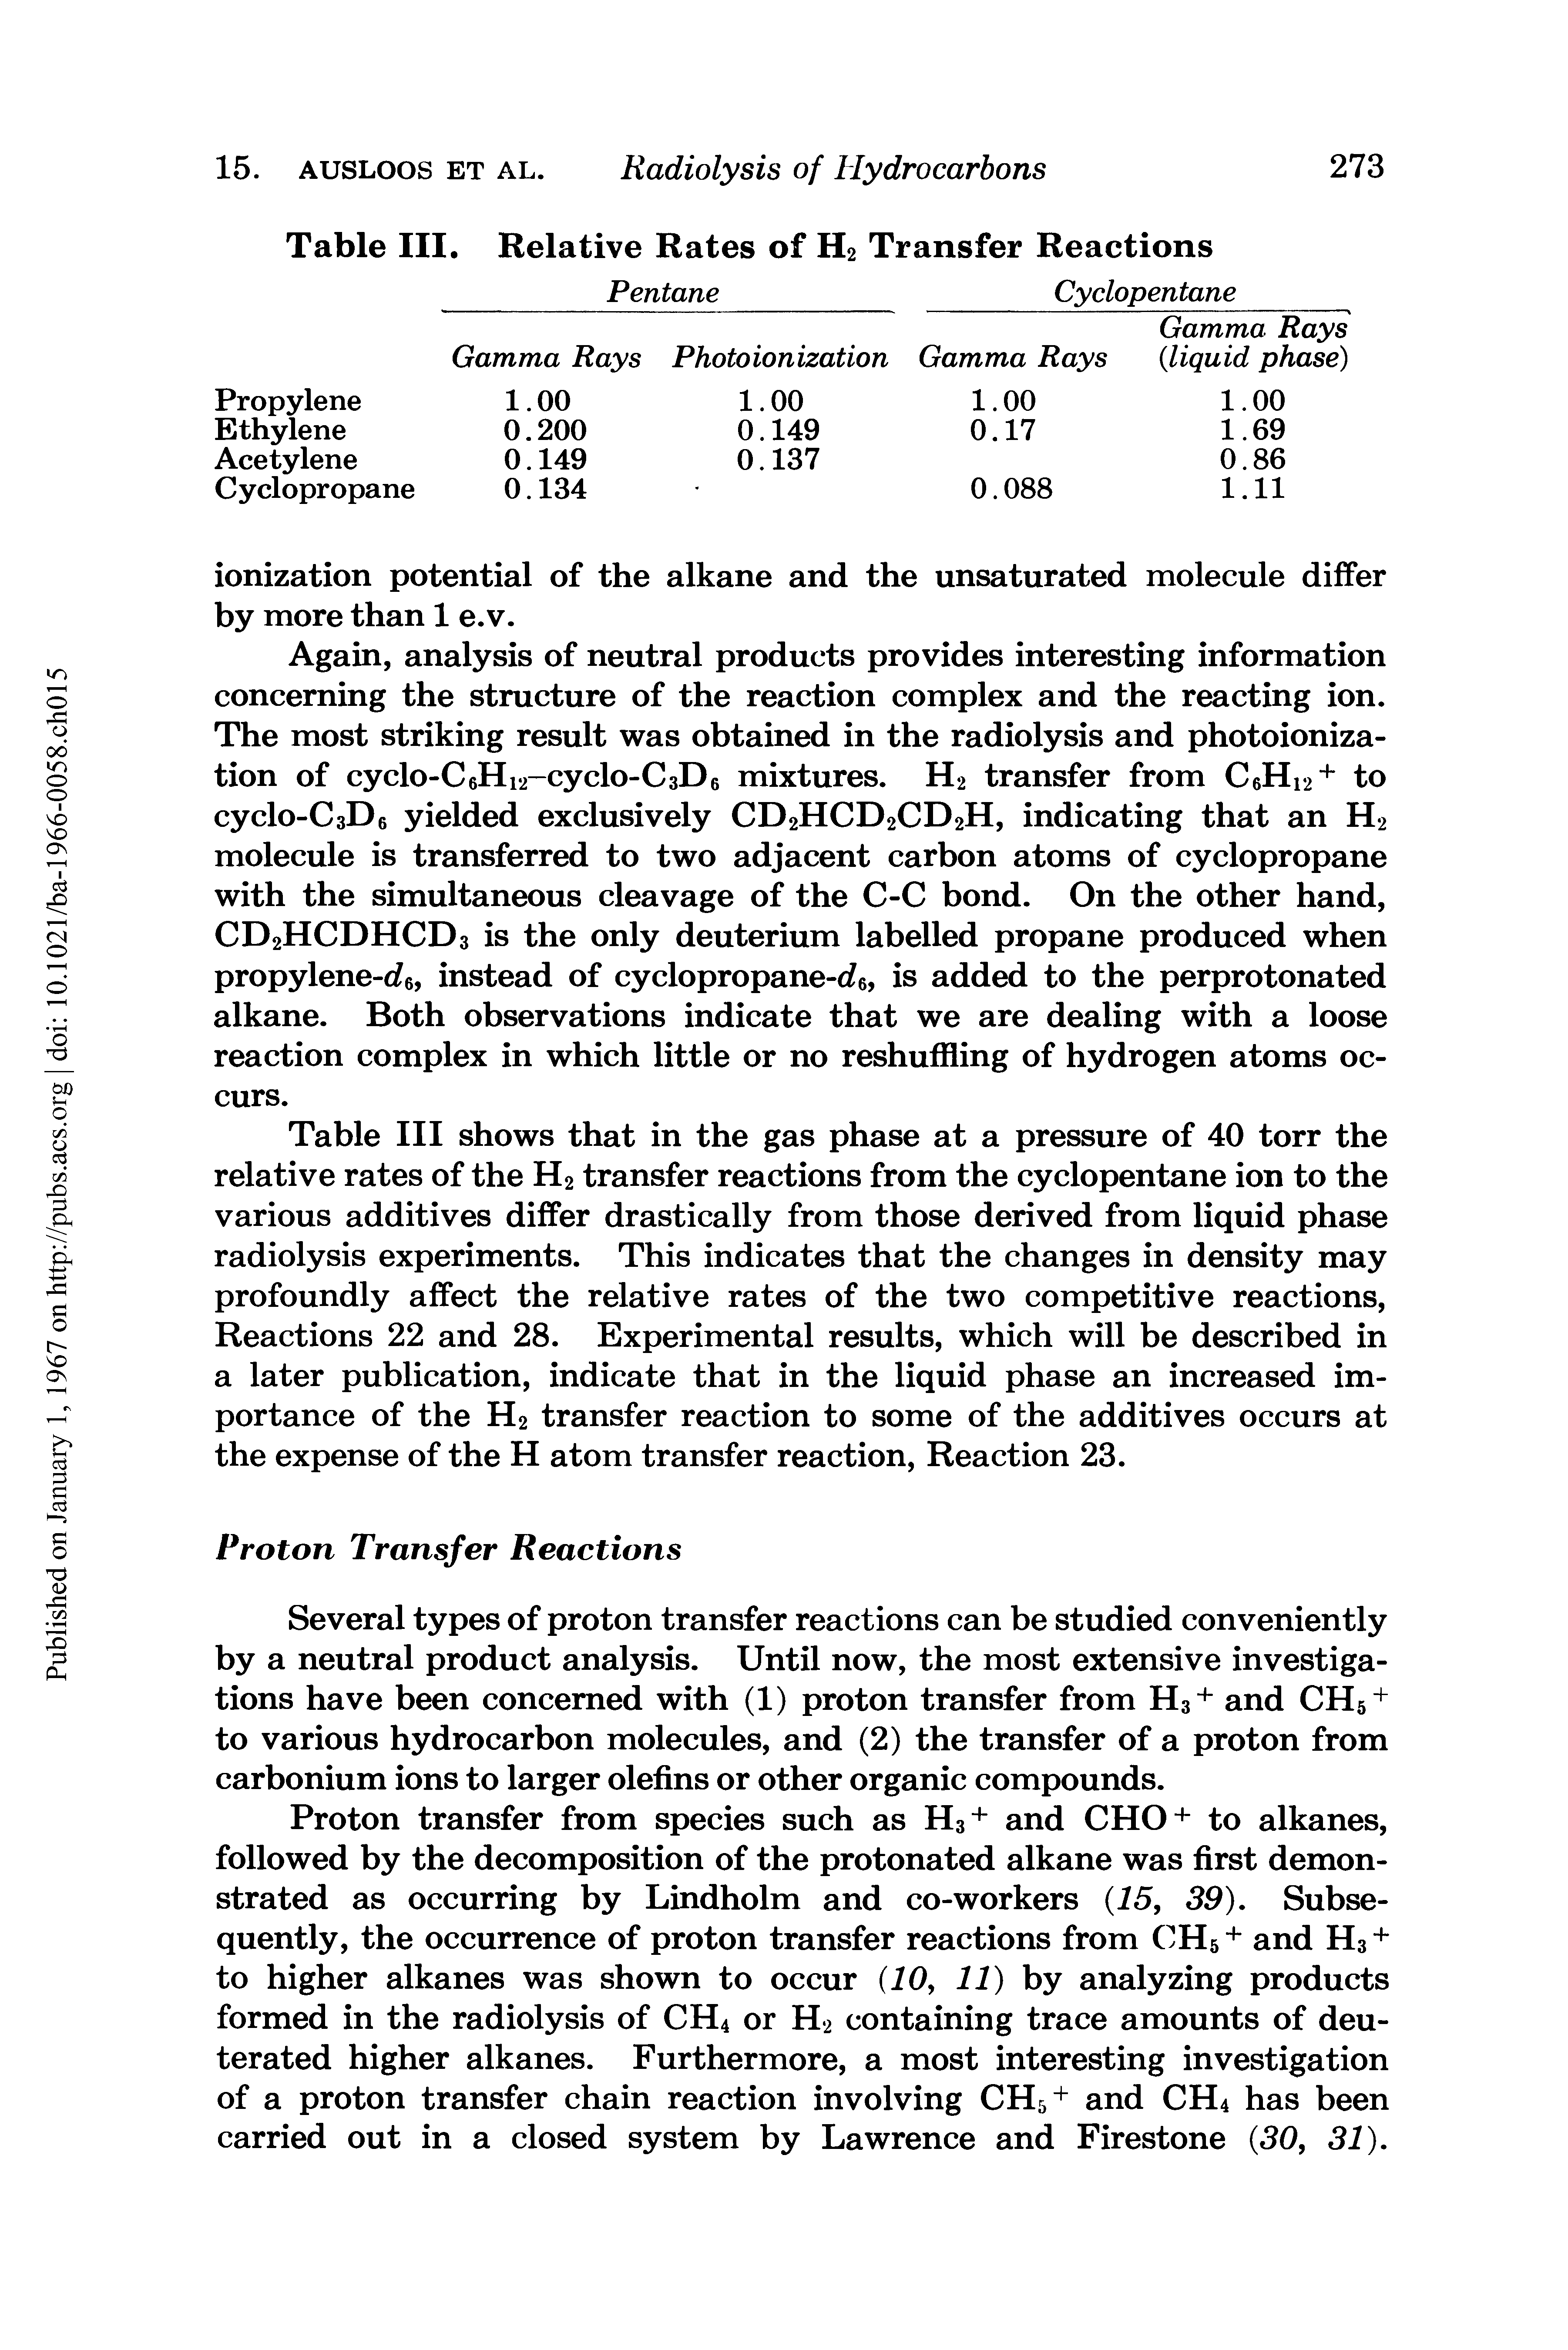 Table III shows that in the gas phase at a pressure of 40 torr the relative rates of the H2 transfer reactions from the cyclopentane ion to the various additives differ drastically from those derived from liquid phase radiolysis experiments. This indicates that the changes in density may profoundly affect the relative rates of the two competitive reactions, Reactions 22 and 28. Experimental results, which will be described in a later publication, indicate that in the liquid phase an increased importance of the H2 transfer reaction to some of the additives occurs at the expense of the H atom transfer reaction, Reaction 23.